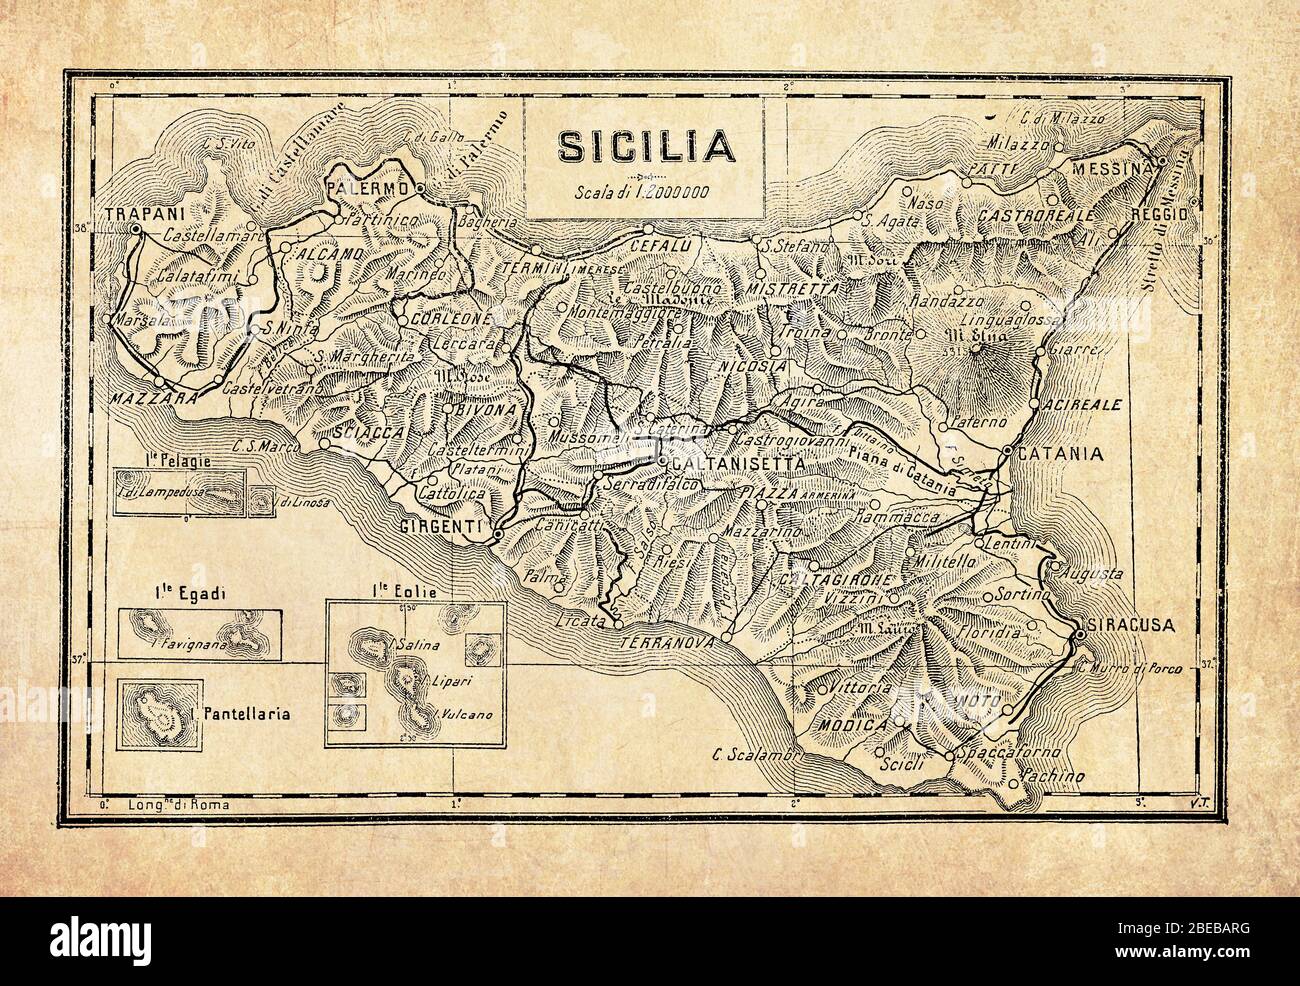 Ancient map of Sicily  the largest island in the Mediterranean Sea and one of the 20 regions of Italy with the surrounding smaller islands, with geographical Italian names and descriptions Stock Photo